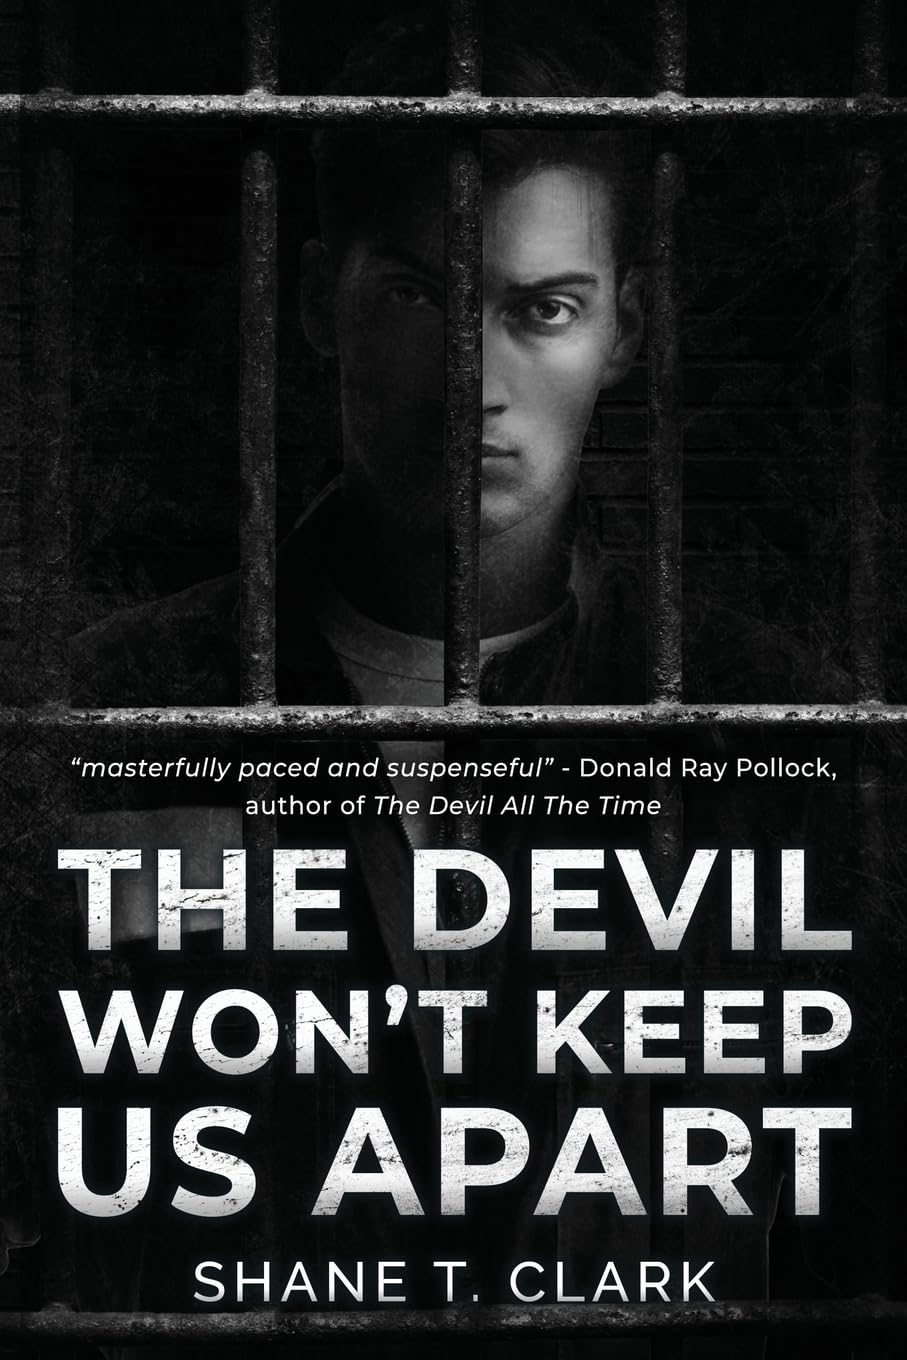 New novel "The Devil Won’t Keep Us Apart" by Shane T. Clark is released, a twisting crime thriller that combines action and mystery with a young man’s heartwarming coming of age